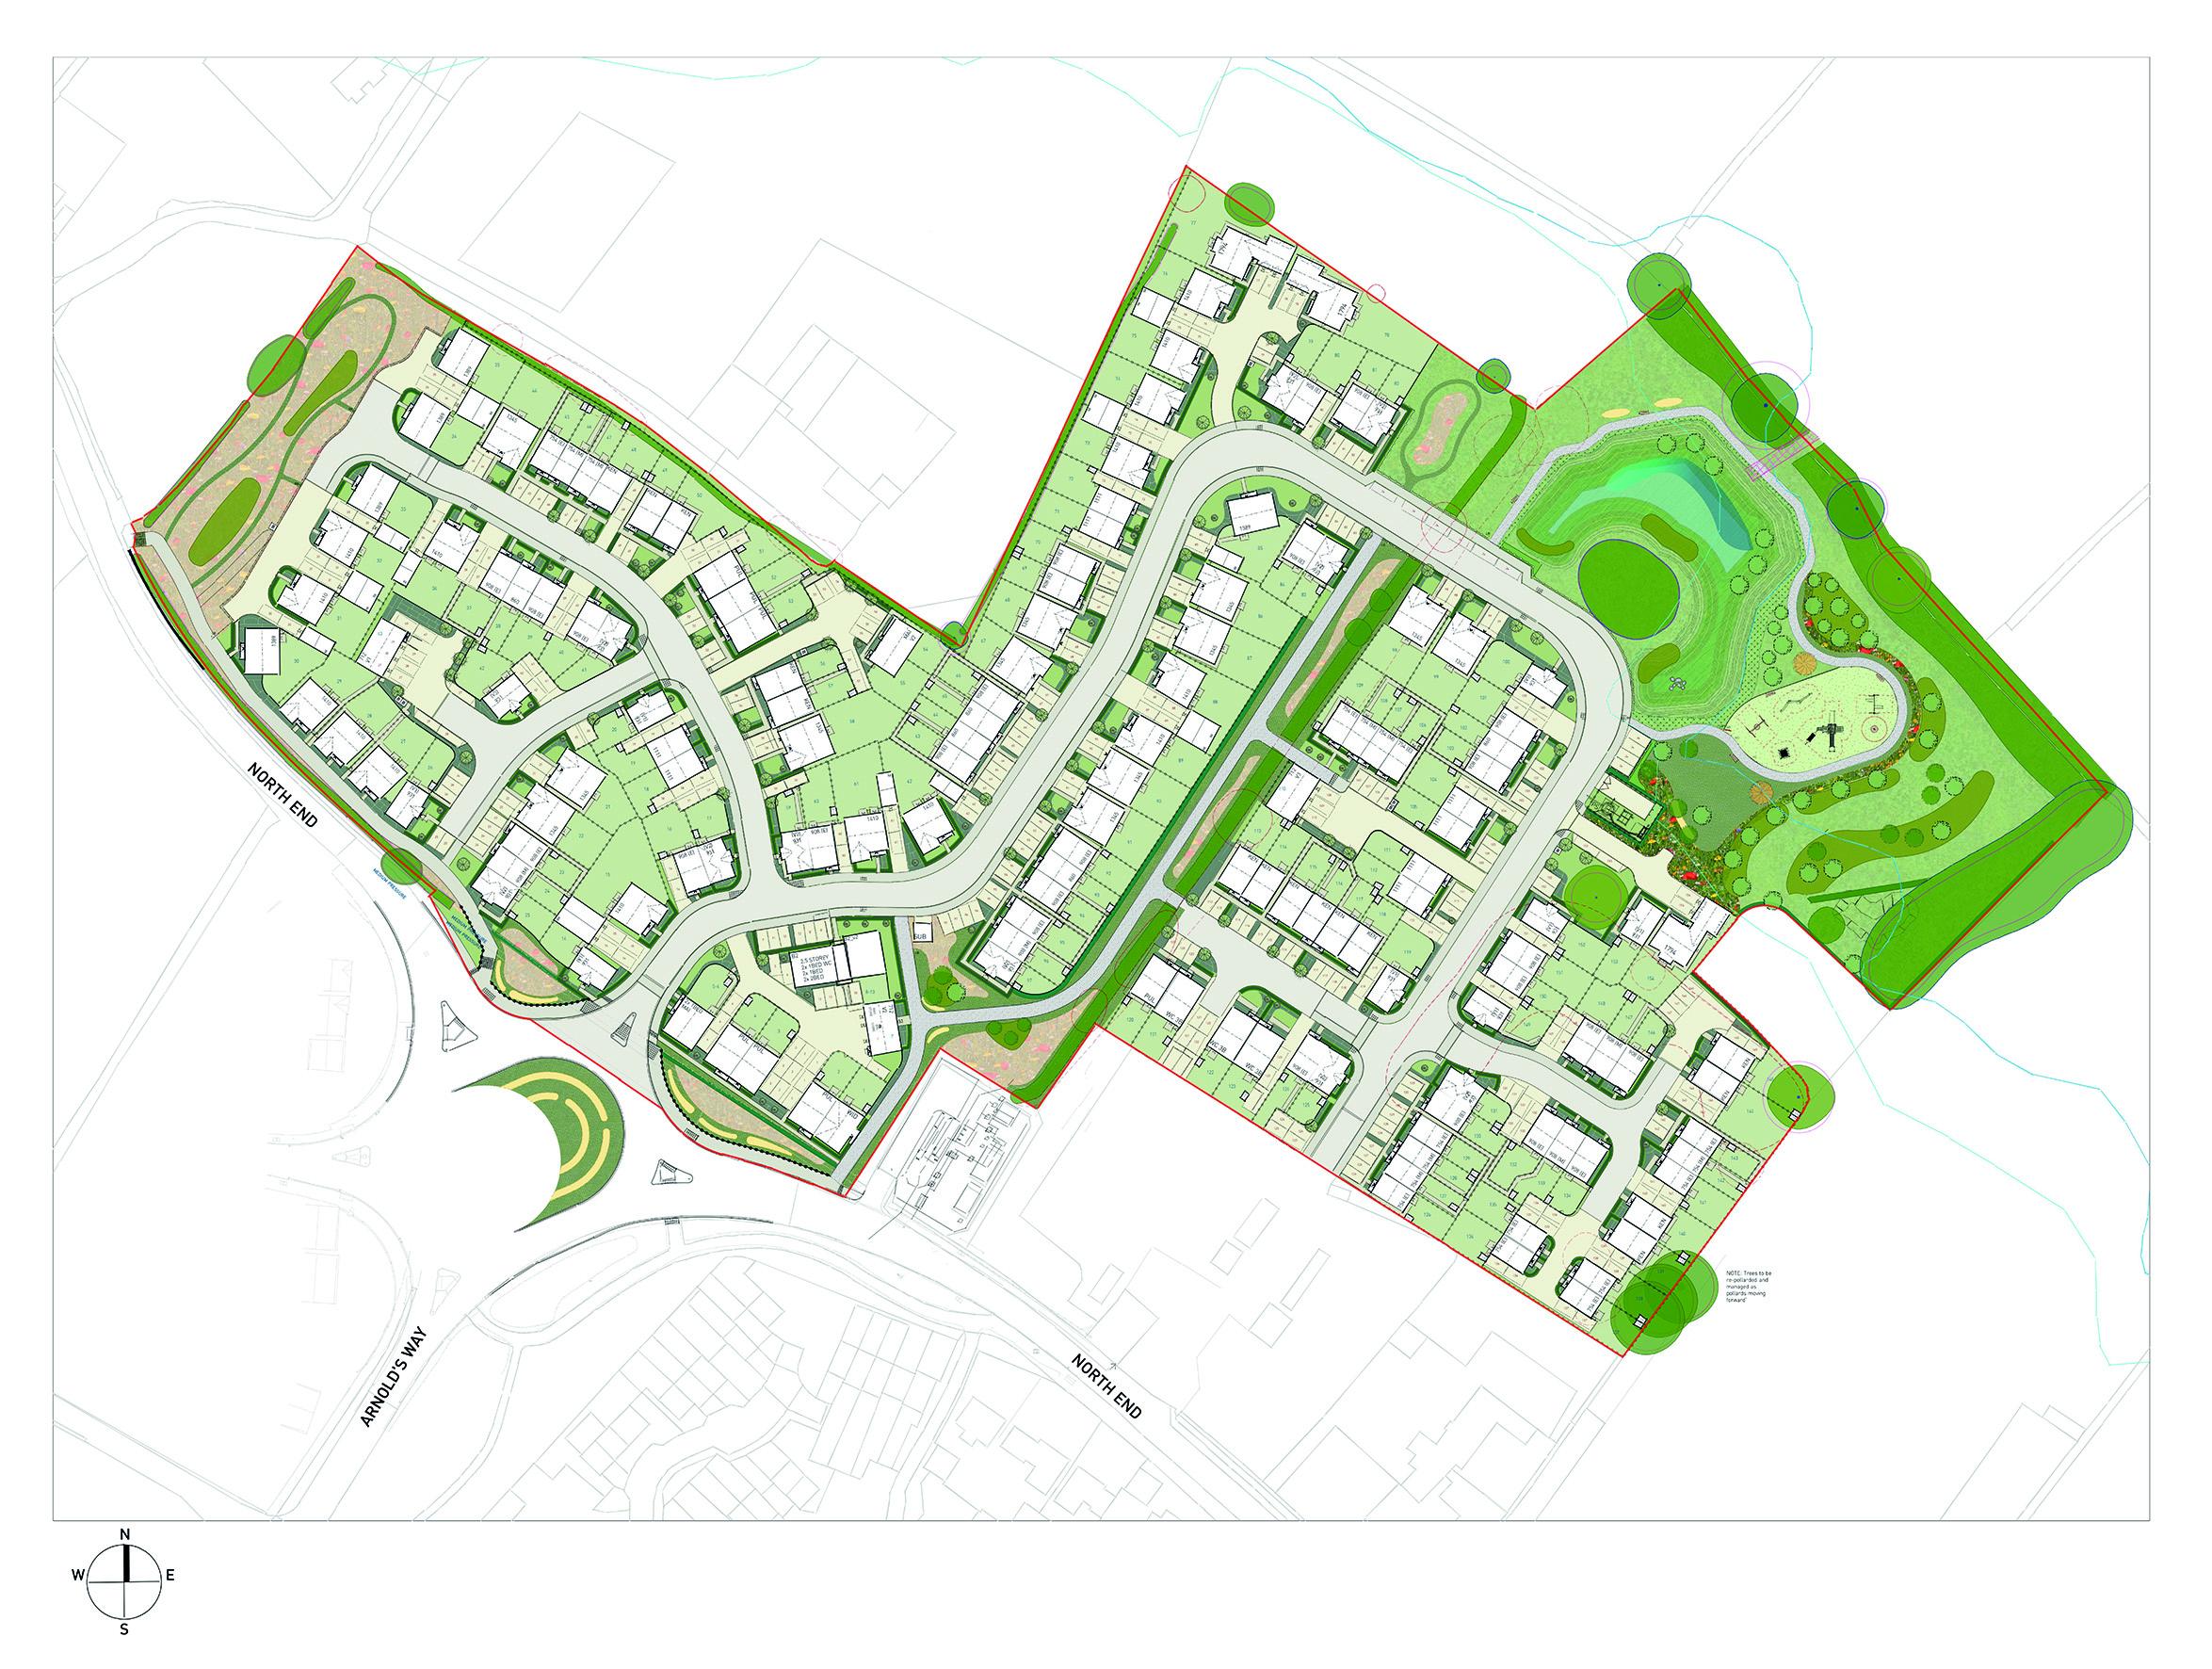 Curo to build 154 new homes in Yatton, North Somerset